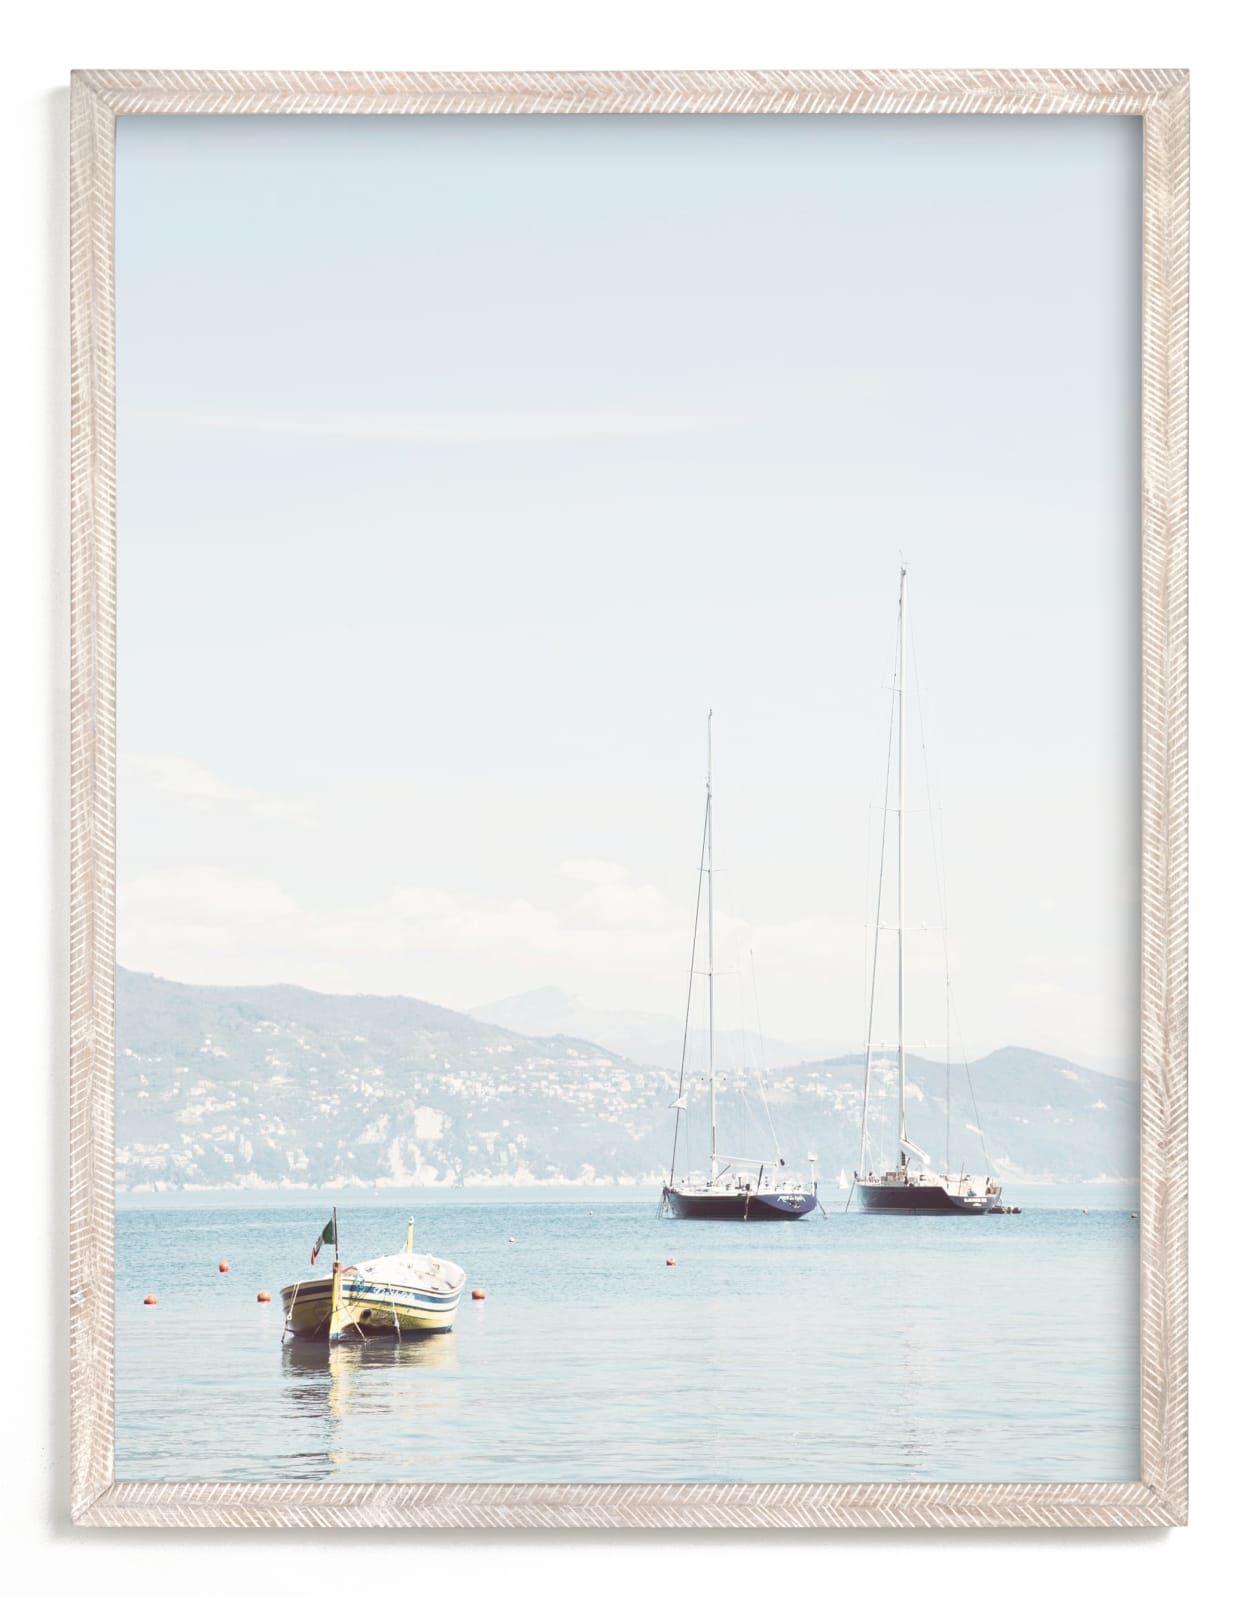 "Portofino Afternoon" - Photography Limited Edition Art Print by Three Kisses Studio. | Minted